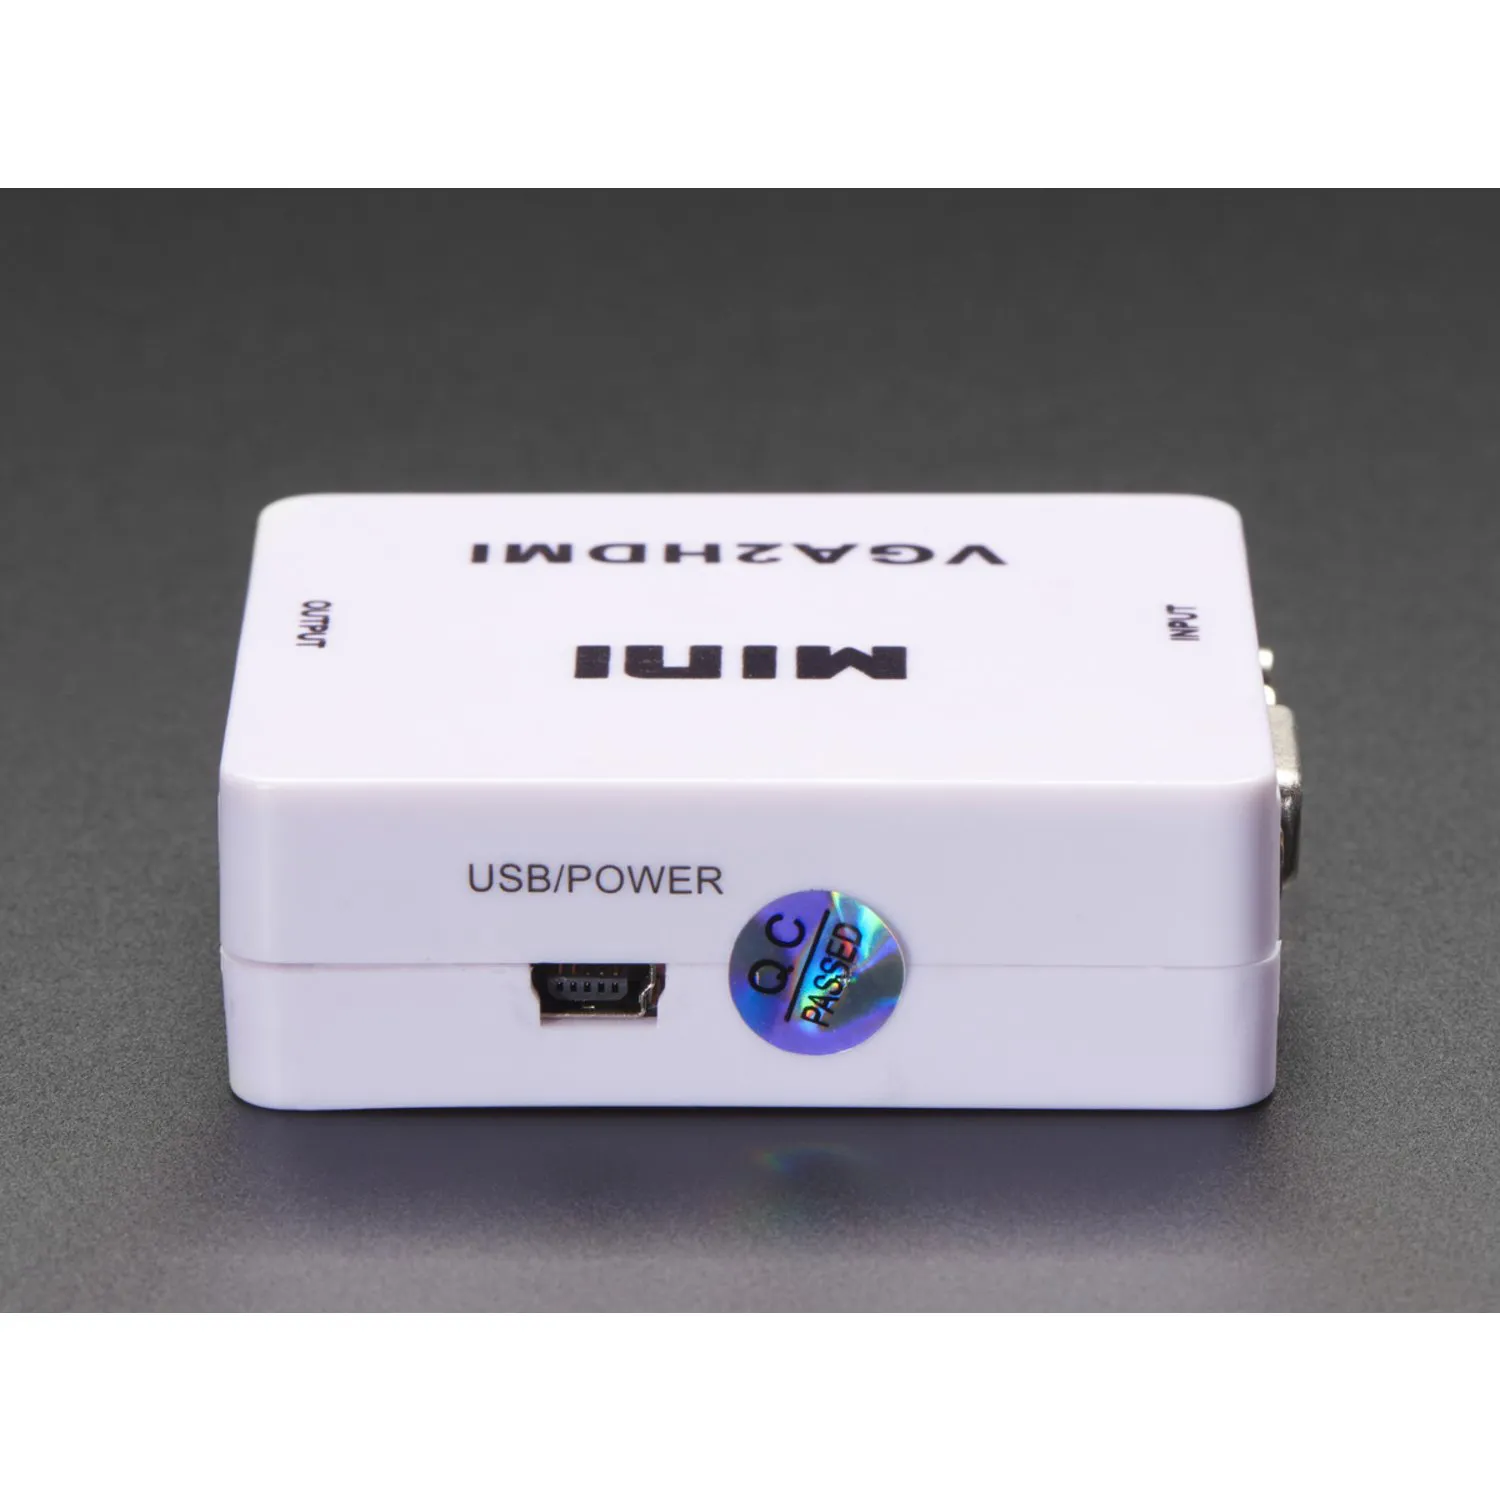 Photo of VGA to HDMI Audio and Video Adapter